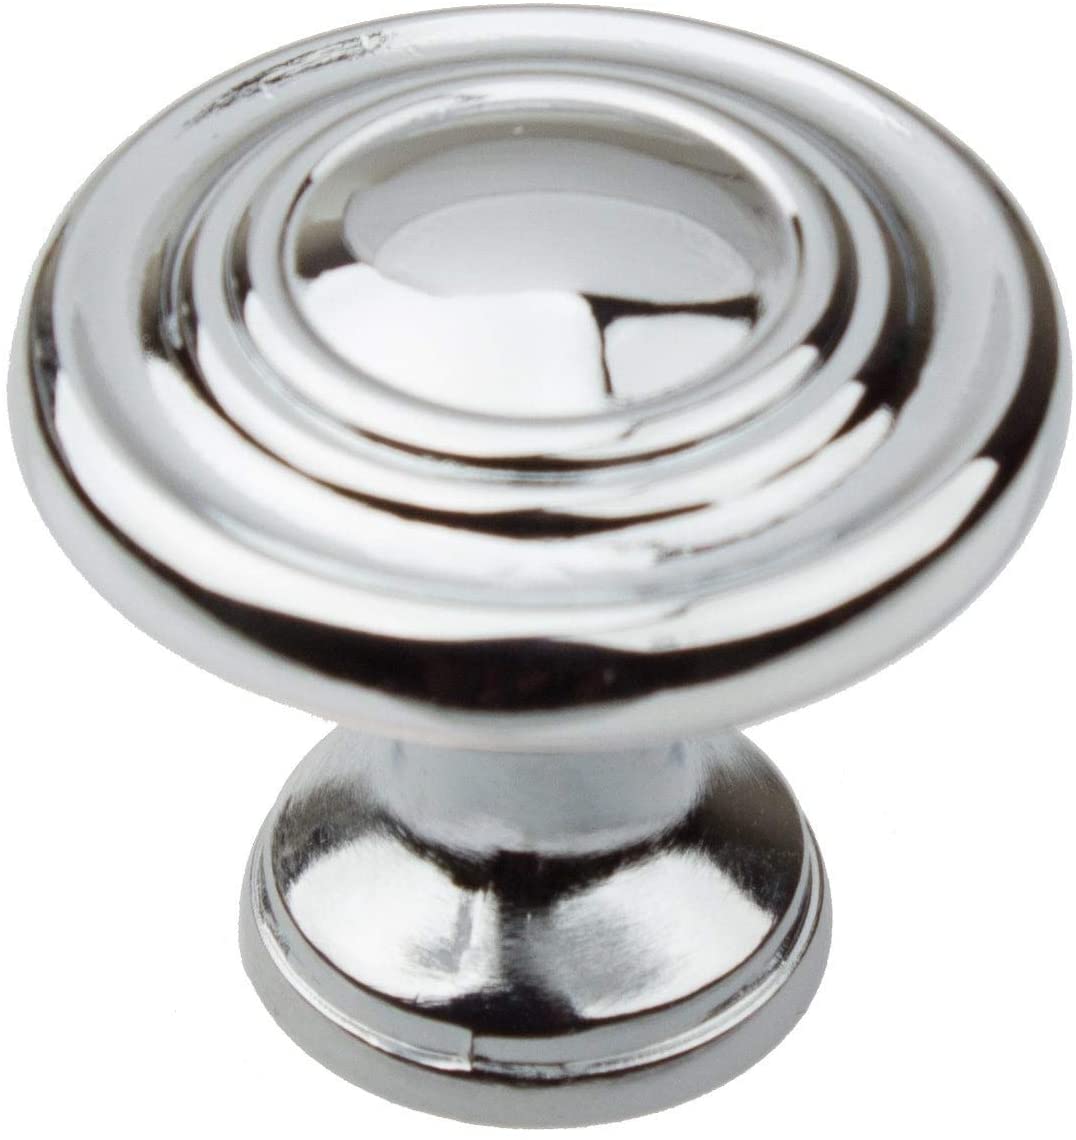 UKN 5 Pack 1 1/4 Polished Chrome Round Ring Cabinet Knobs Traditional Zinc Finish